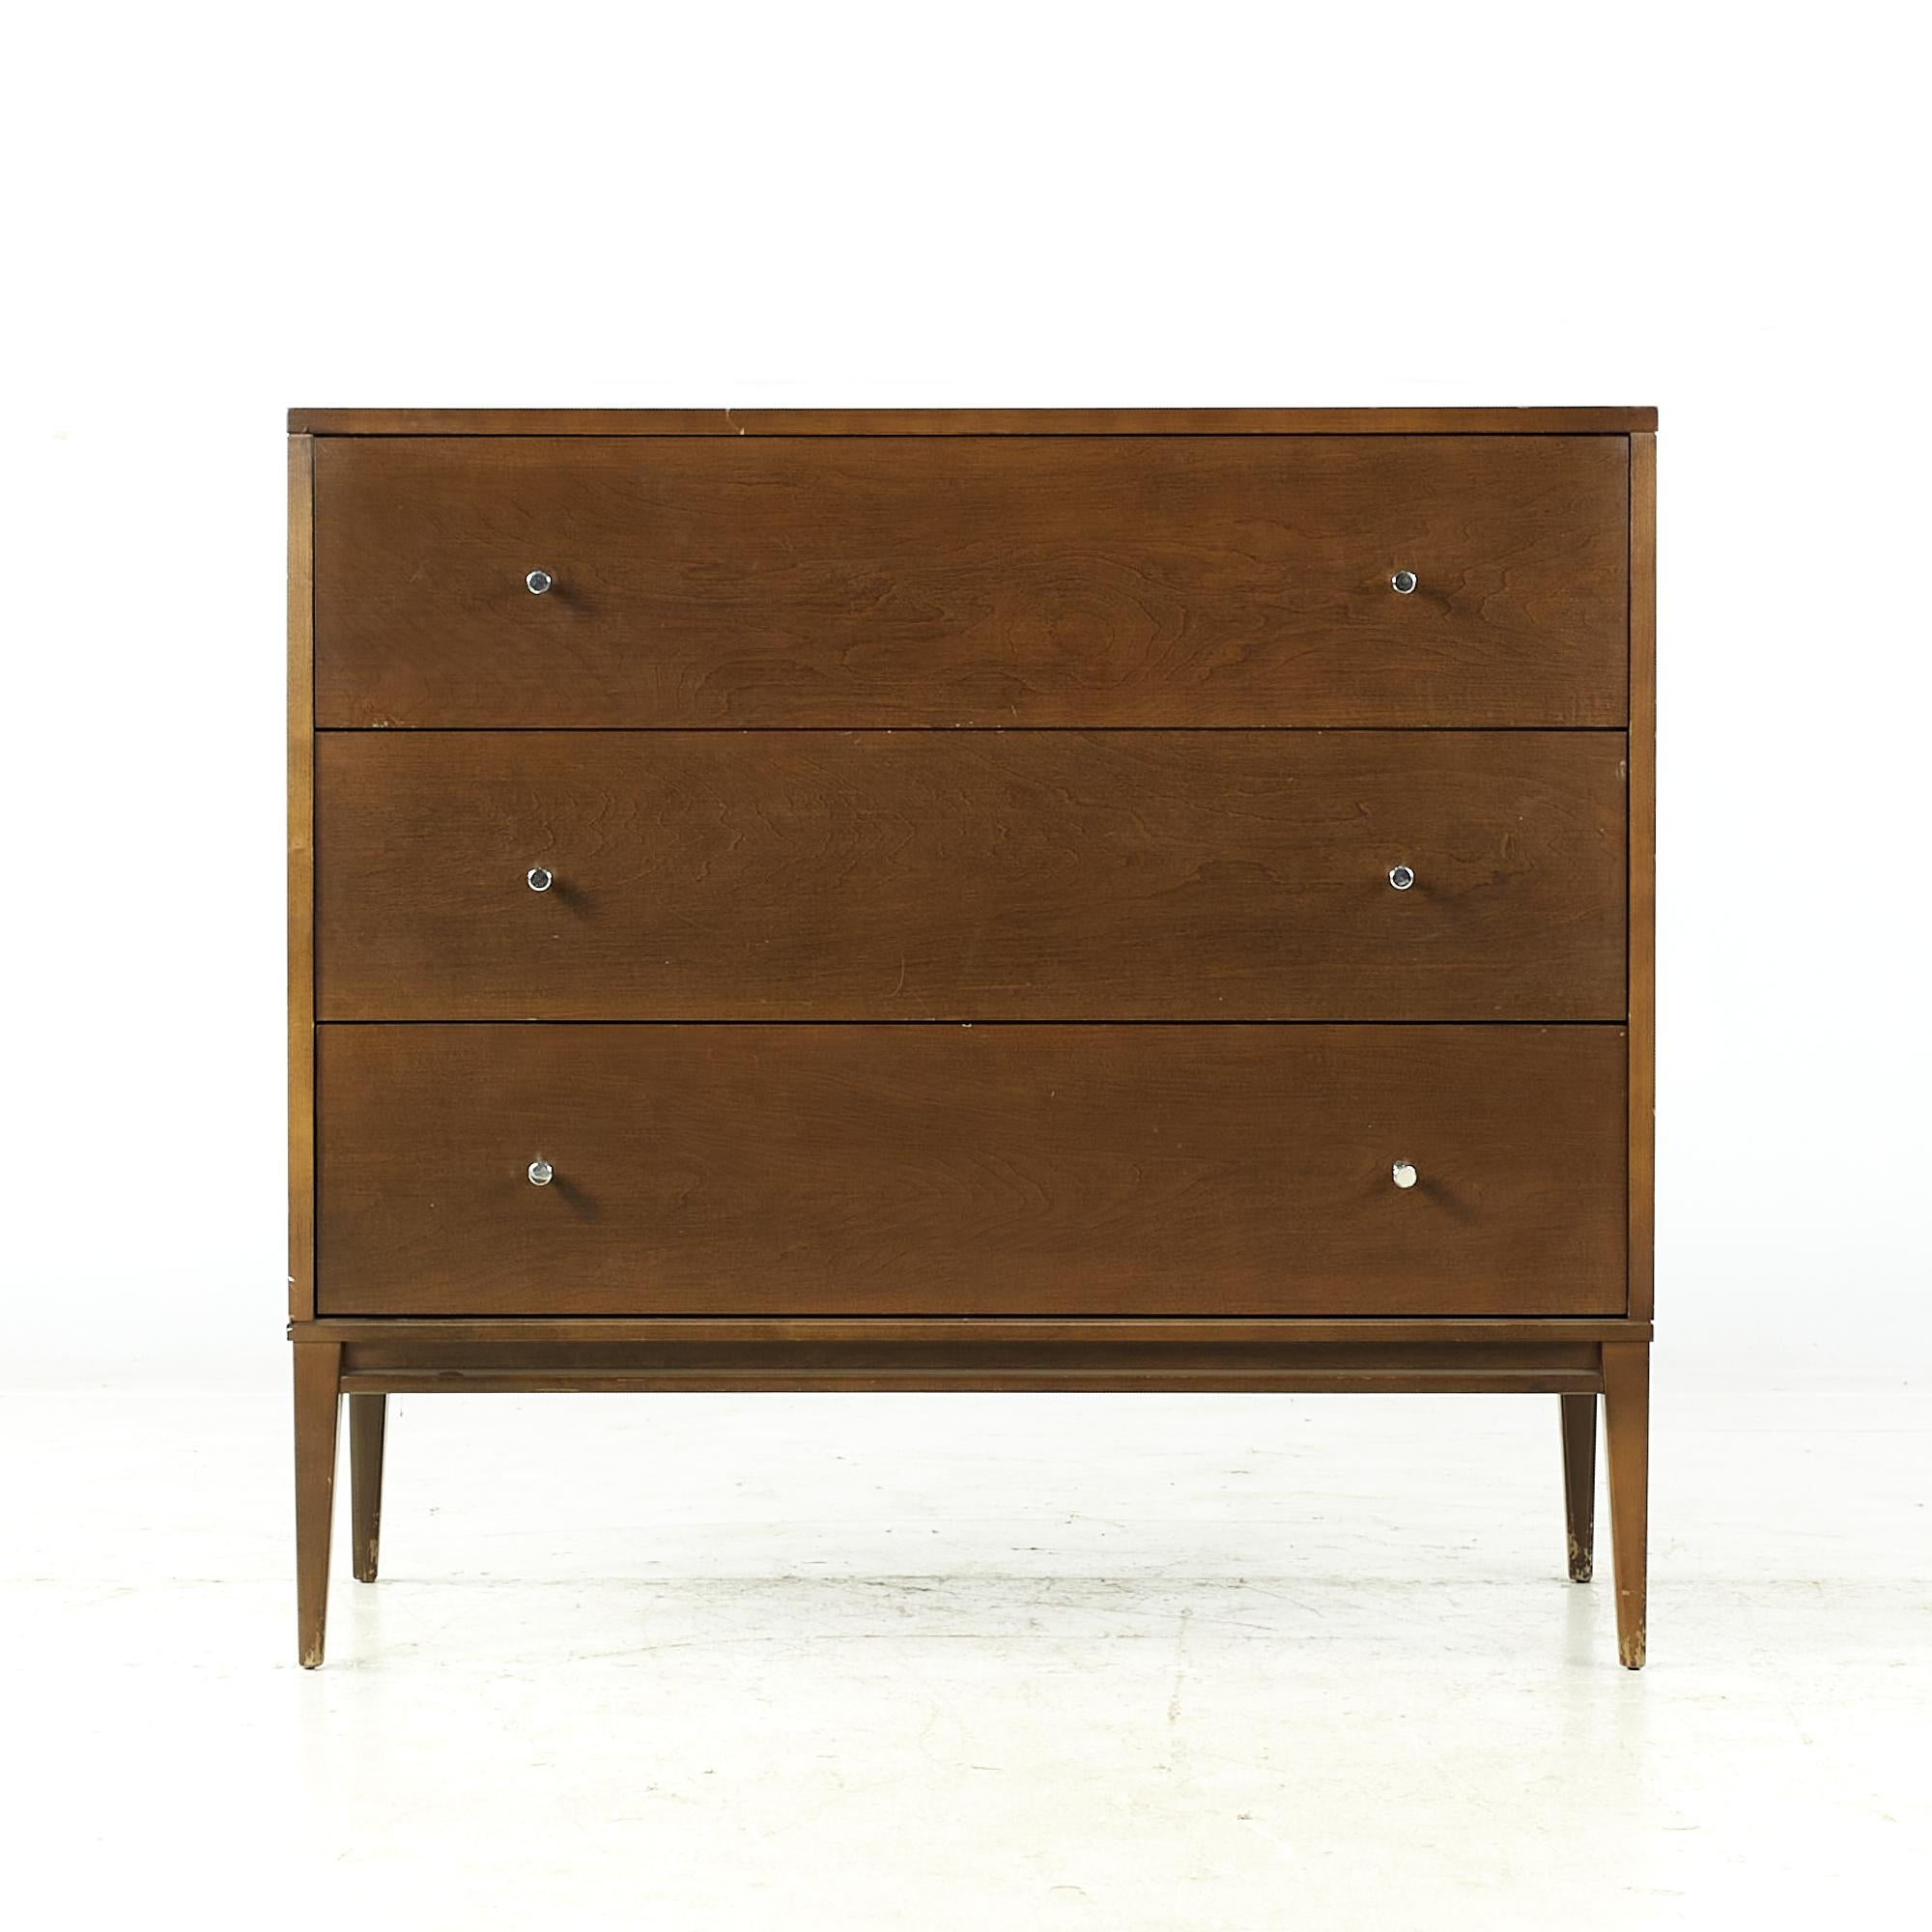 Paul McCobb Planner Group midcentury 3 drawer chest of drawers dresser.

This chest of drawers measures: 36 wide x 18 deep x 33.25 inches high.

All pieces of furniture can be had in what we call restored vintage condition. That means the piece